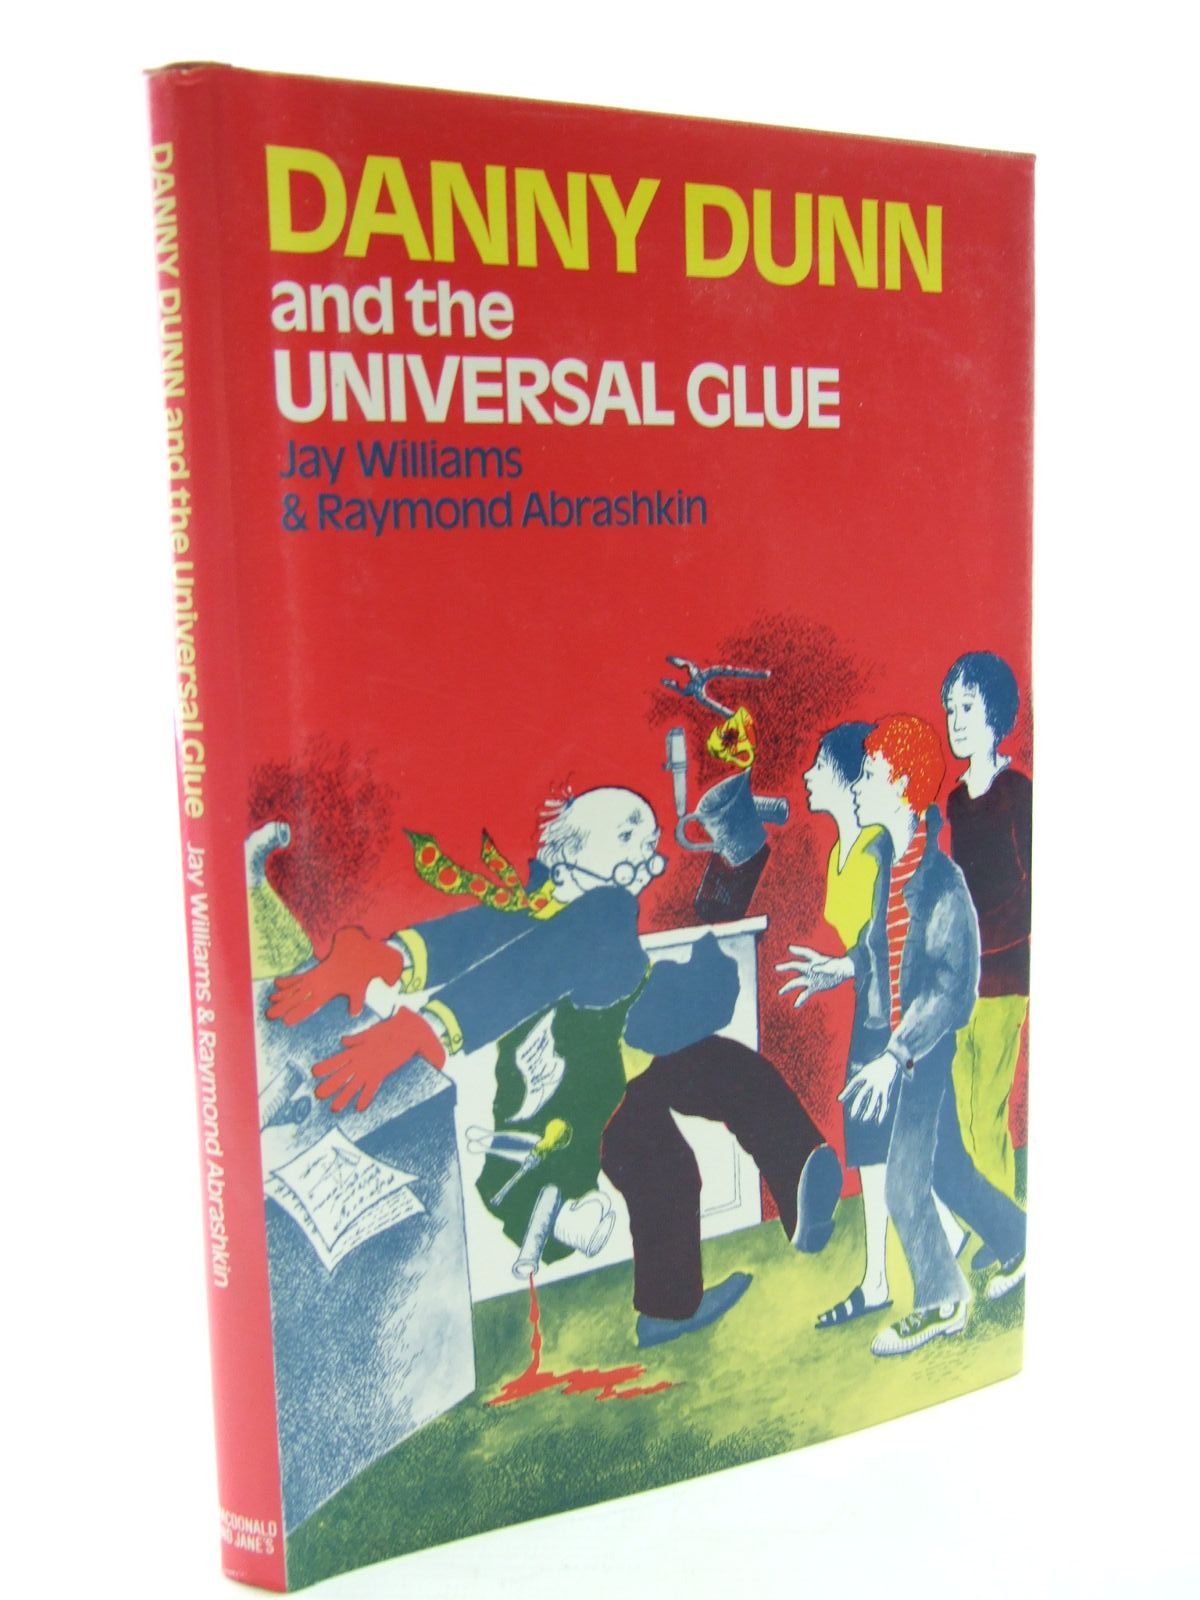 Photo of DANNY DUNN AND THE UNIVERSAL GLUE- Stock Number: 2107188